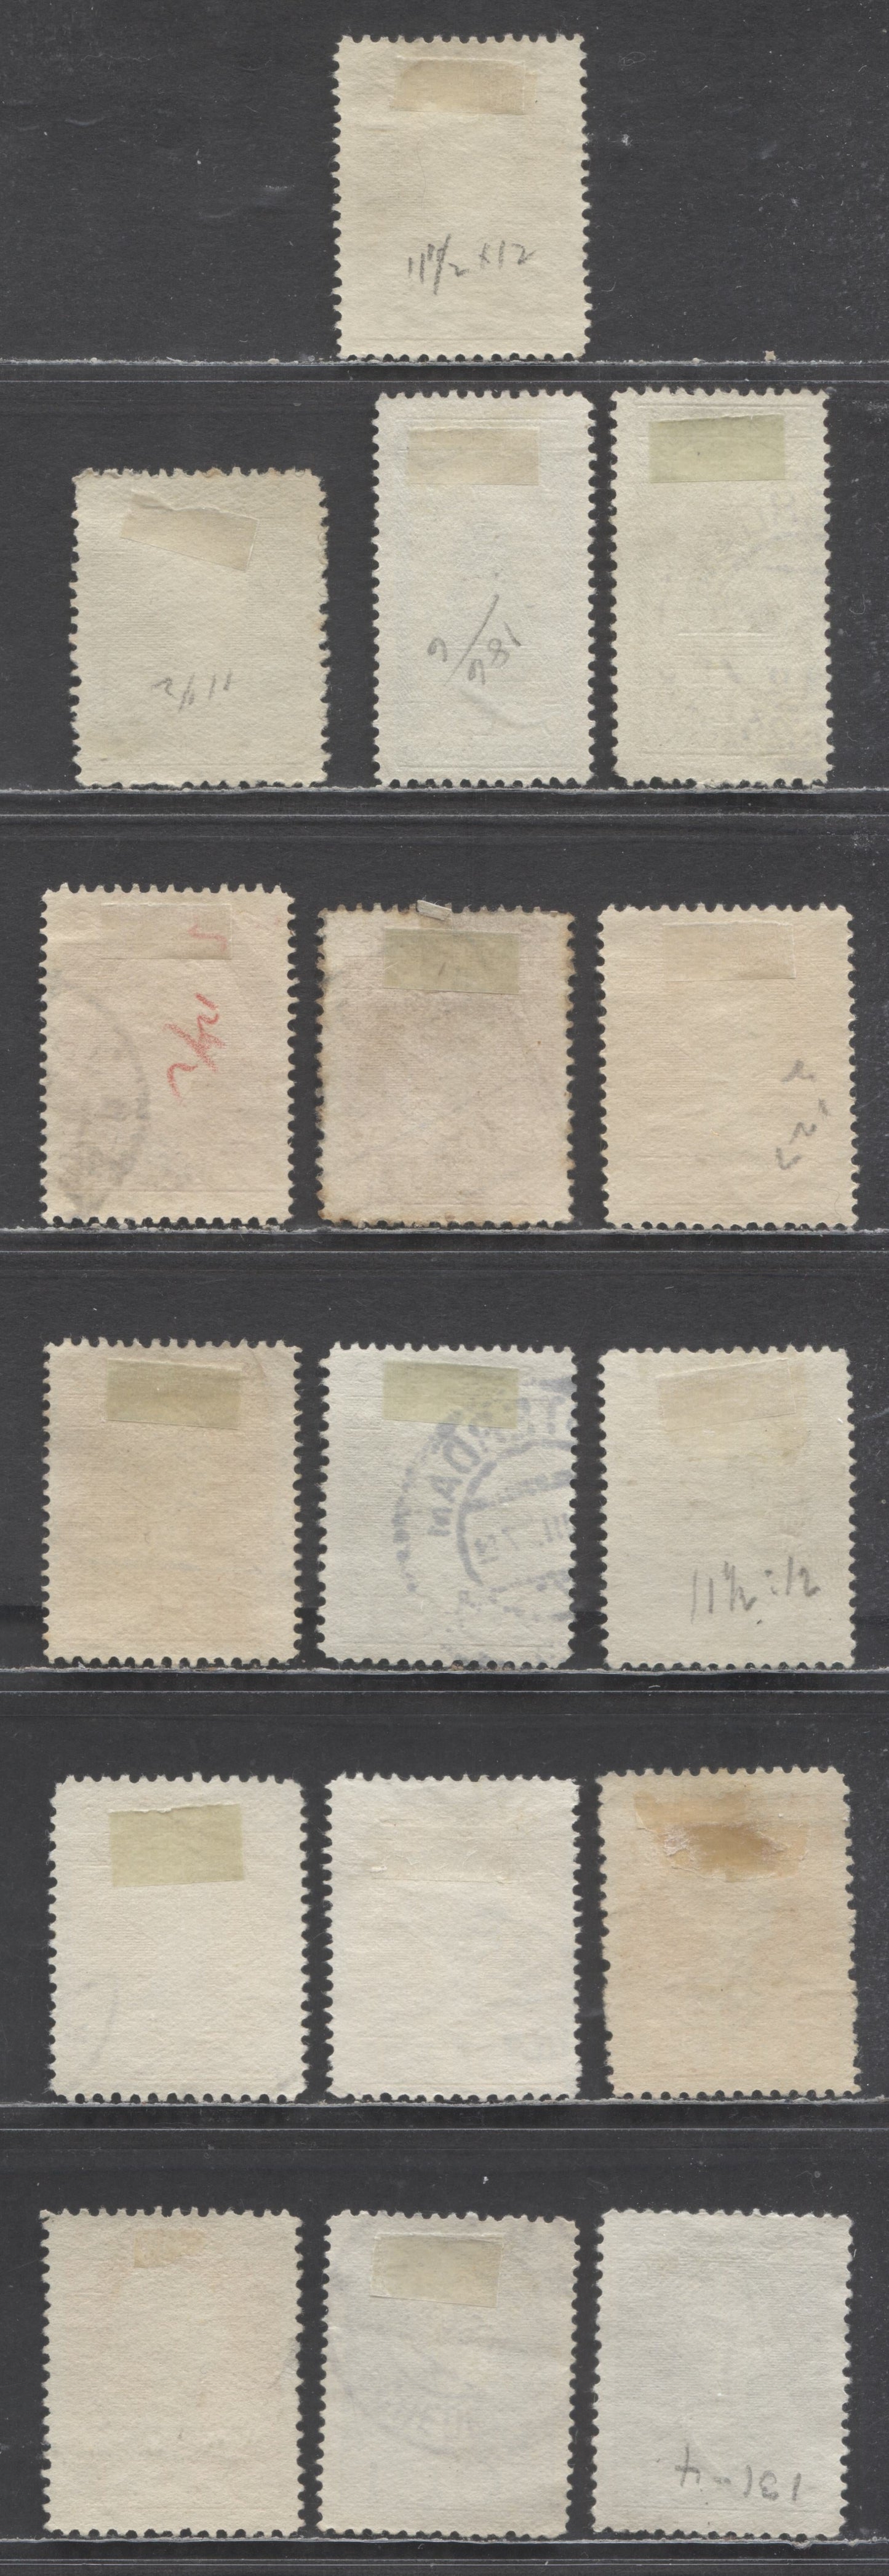 Lot 94 Netherlands SC#124-131 1923 25th Anniversary Of Accession Of Queen Wilhelmina Issue, Two Different Perfs, 16 Fine/Very Fine Used Singles, Estimated Value $10